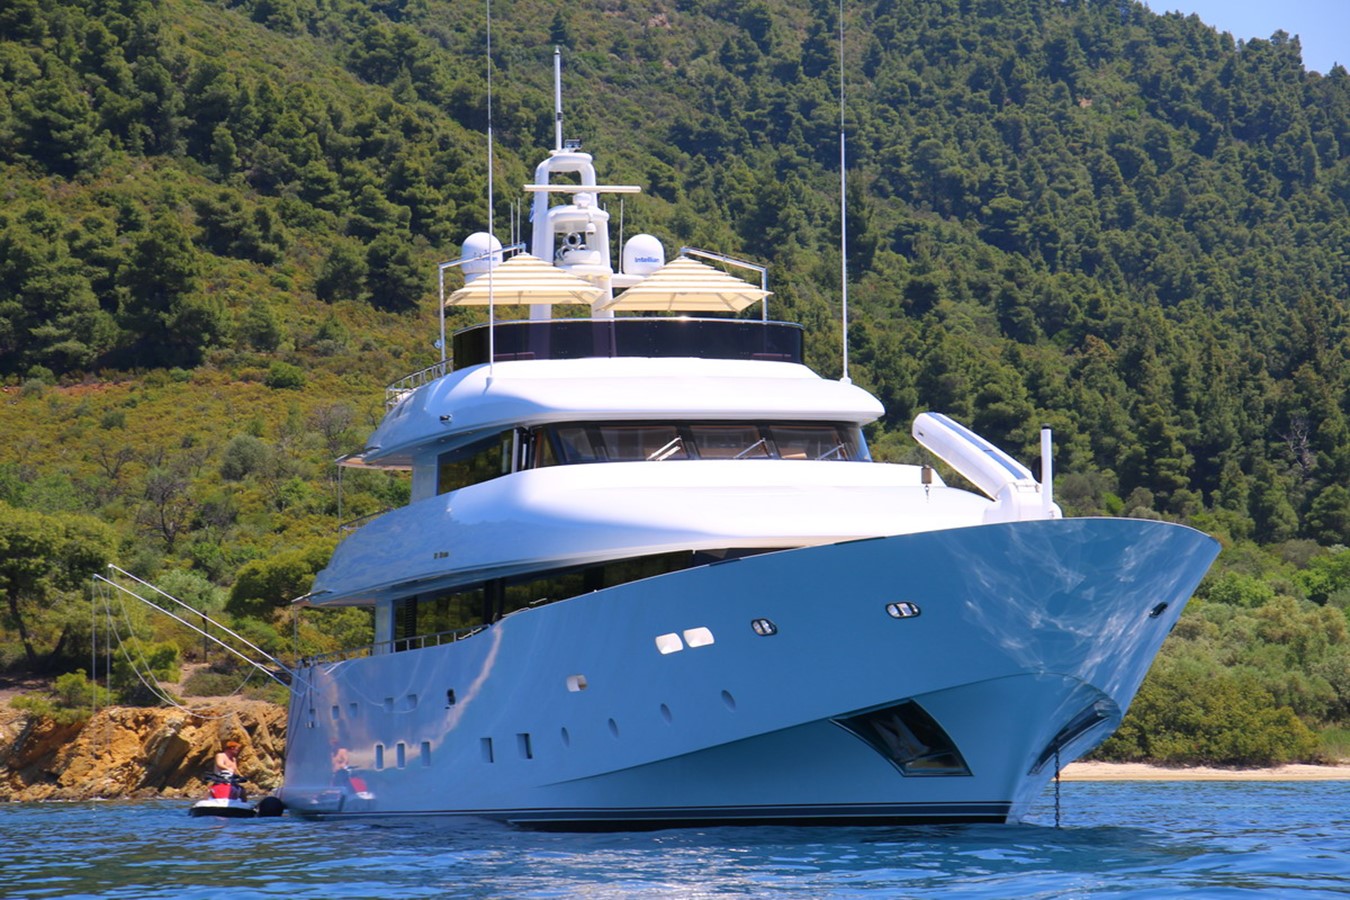 € 1M Price Reduction: MR MOUSE 42m full steel yacht for sale